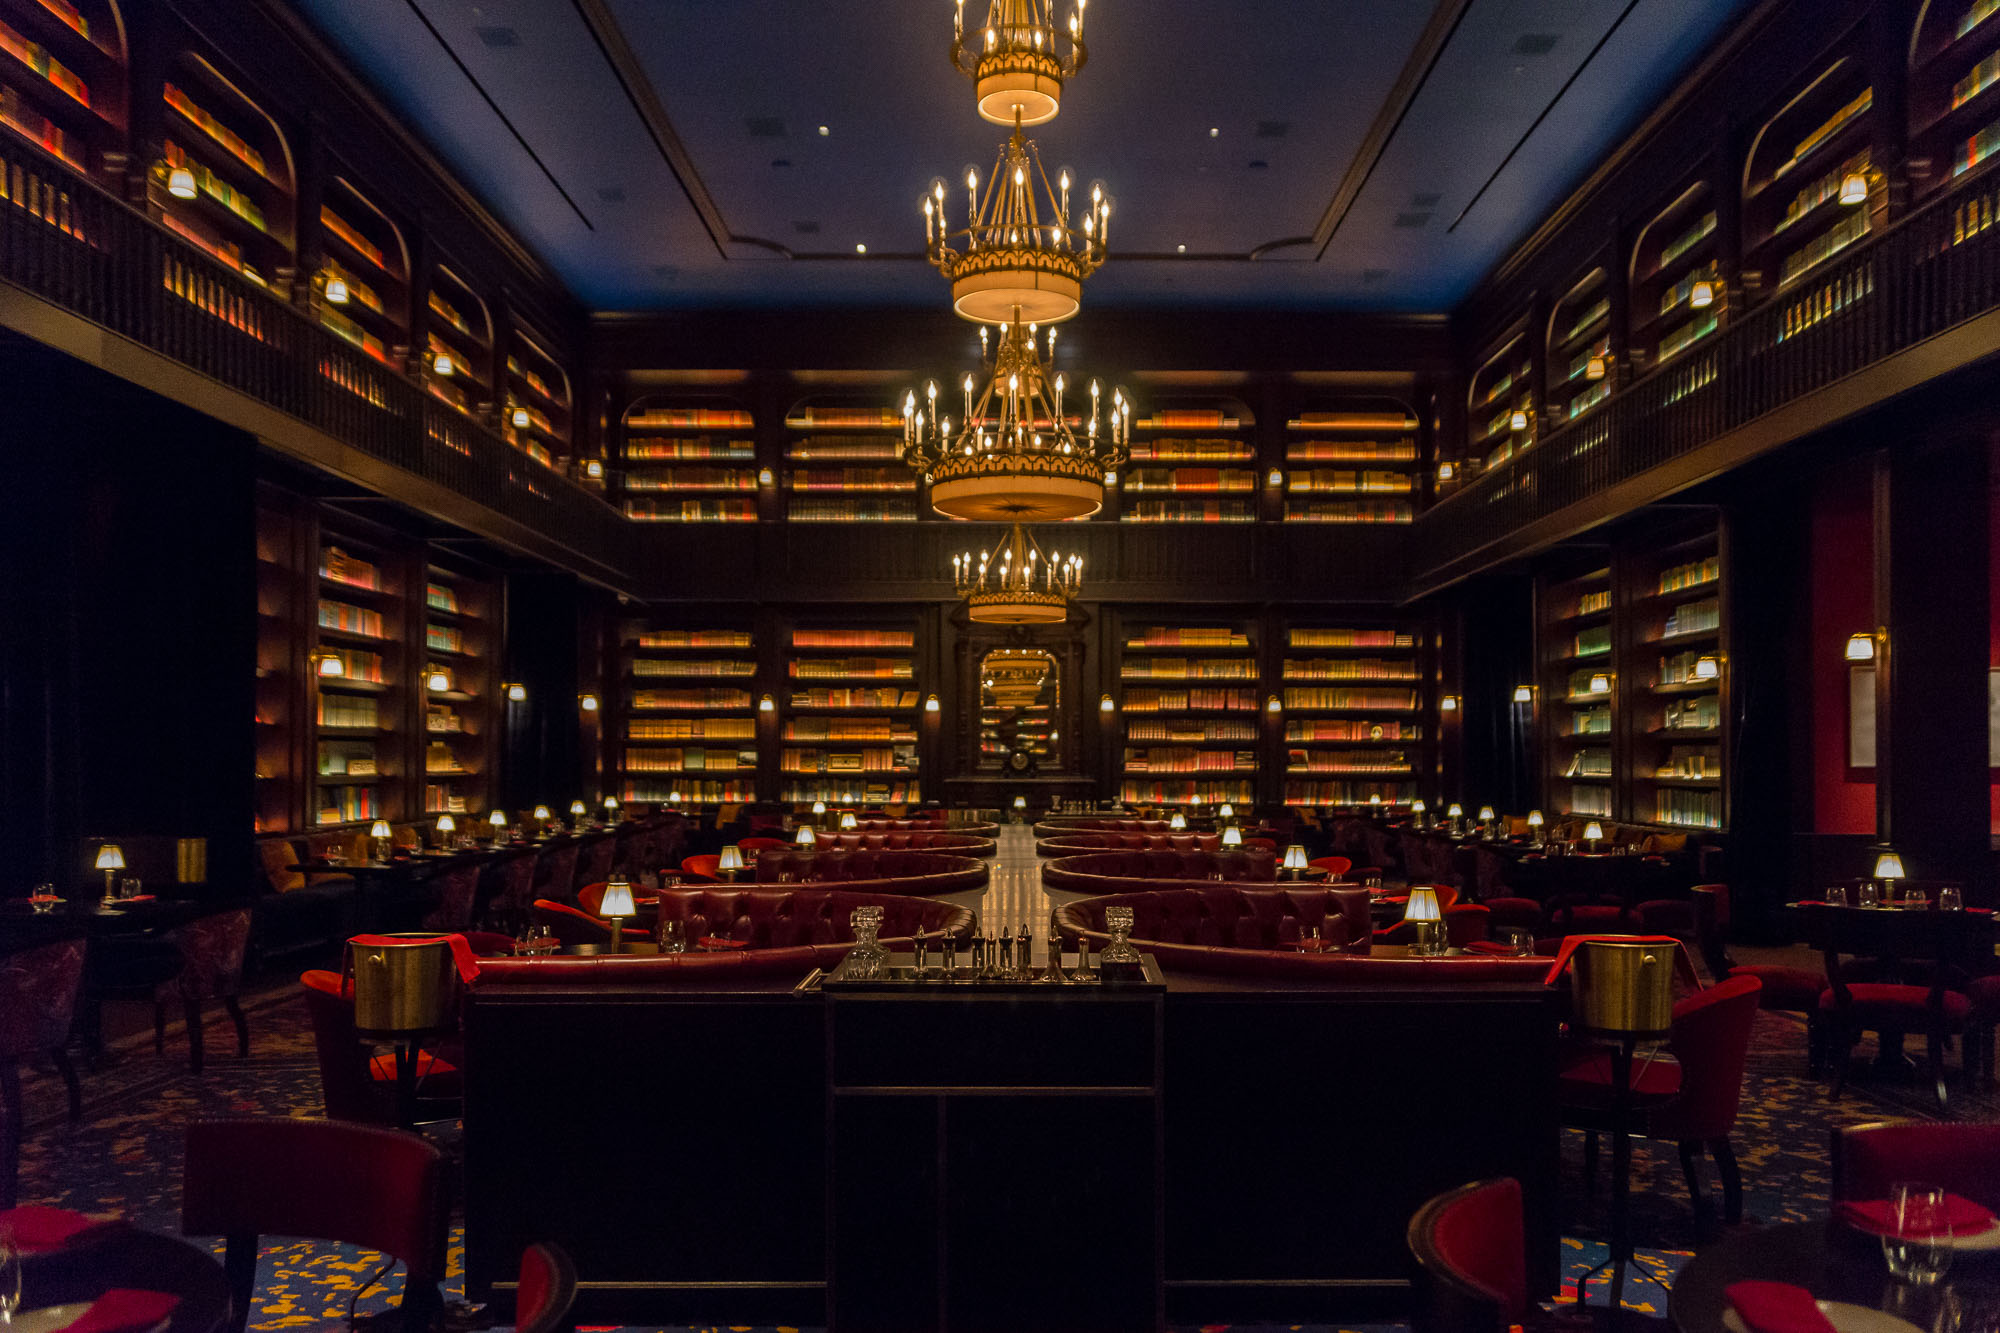 A handsome restaurant with 2,000 books lining the shelves